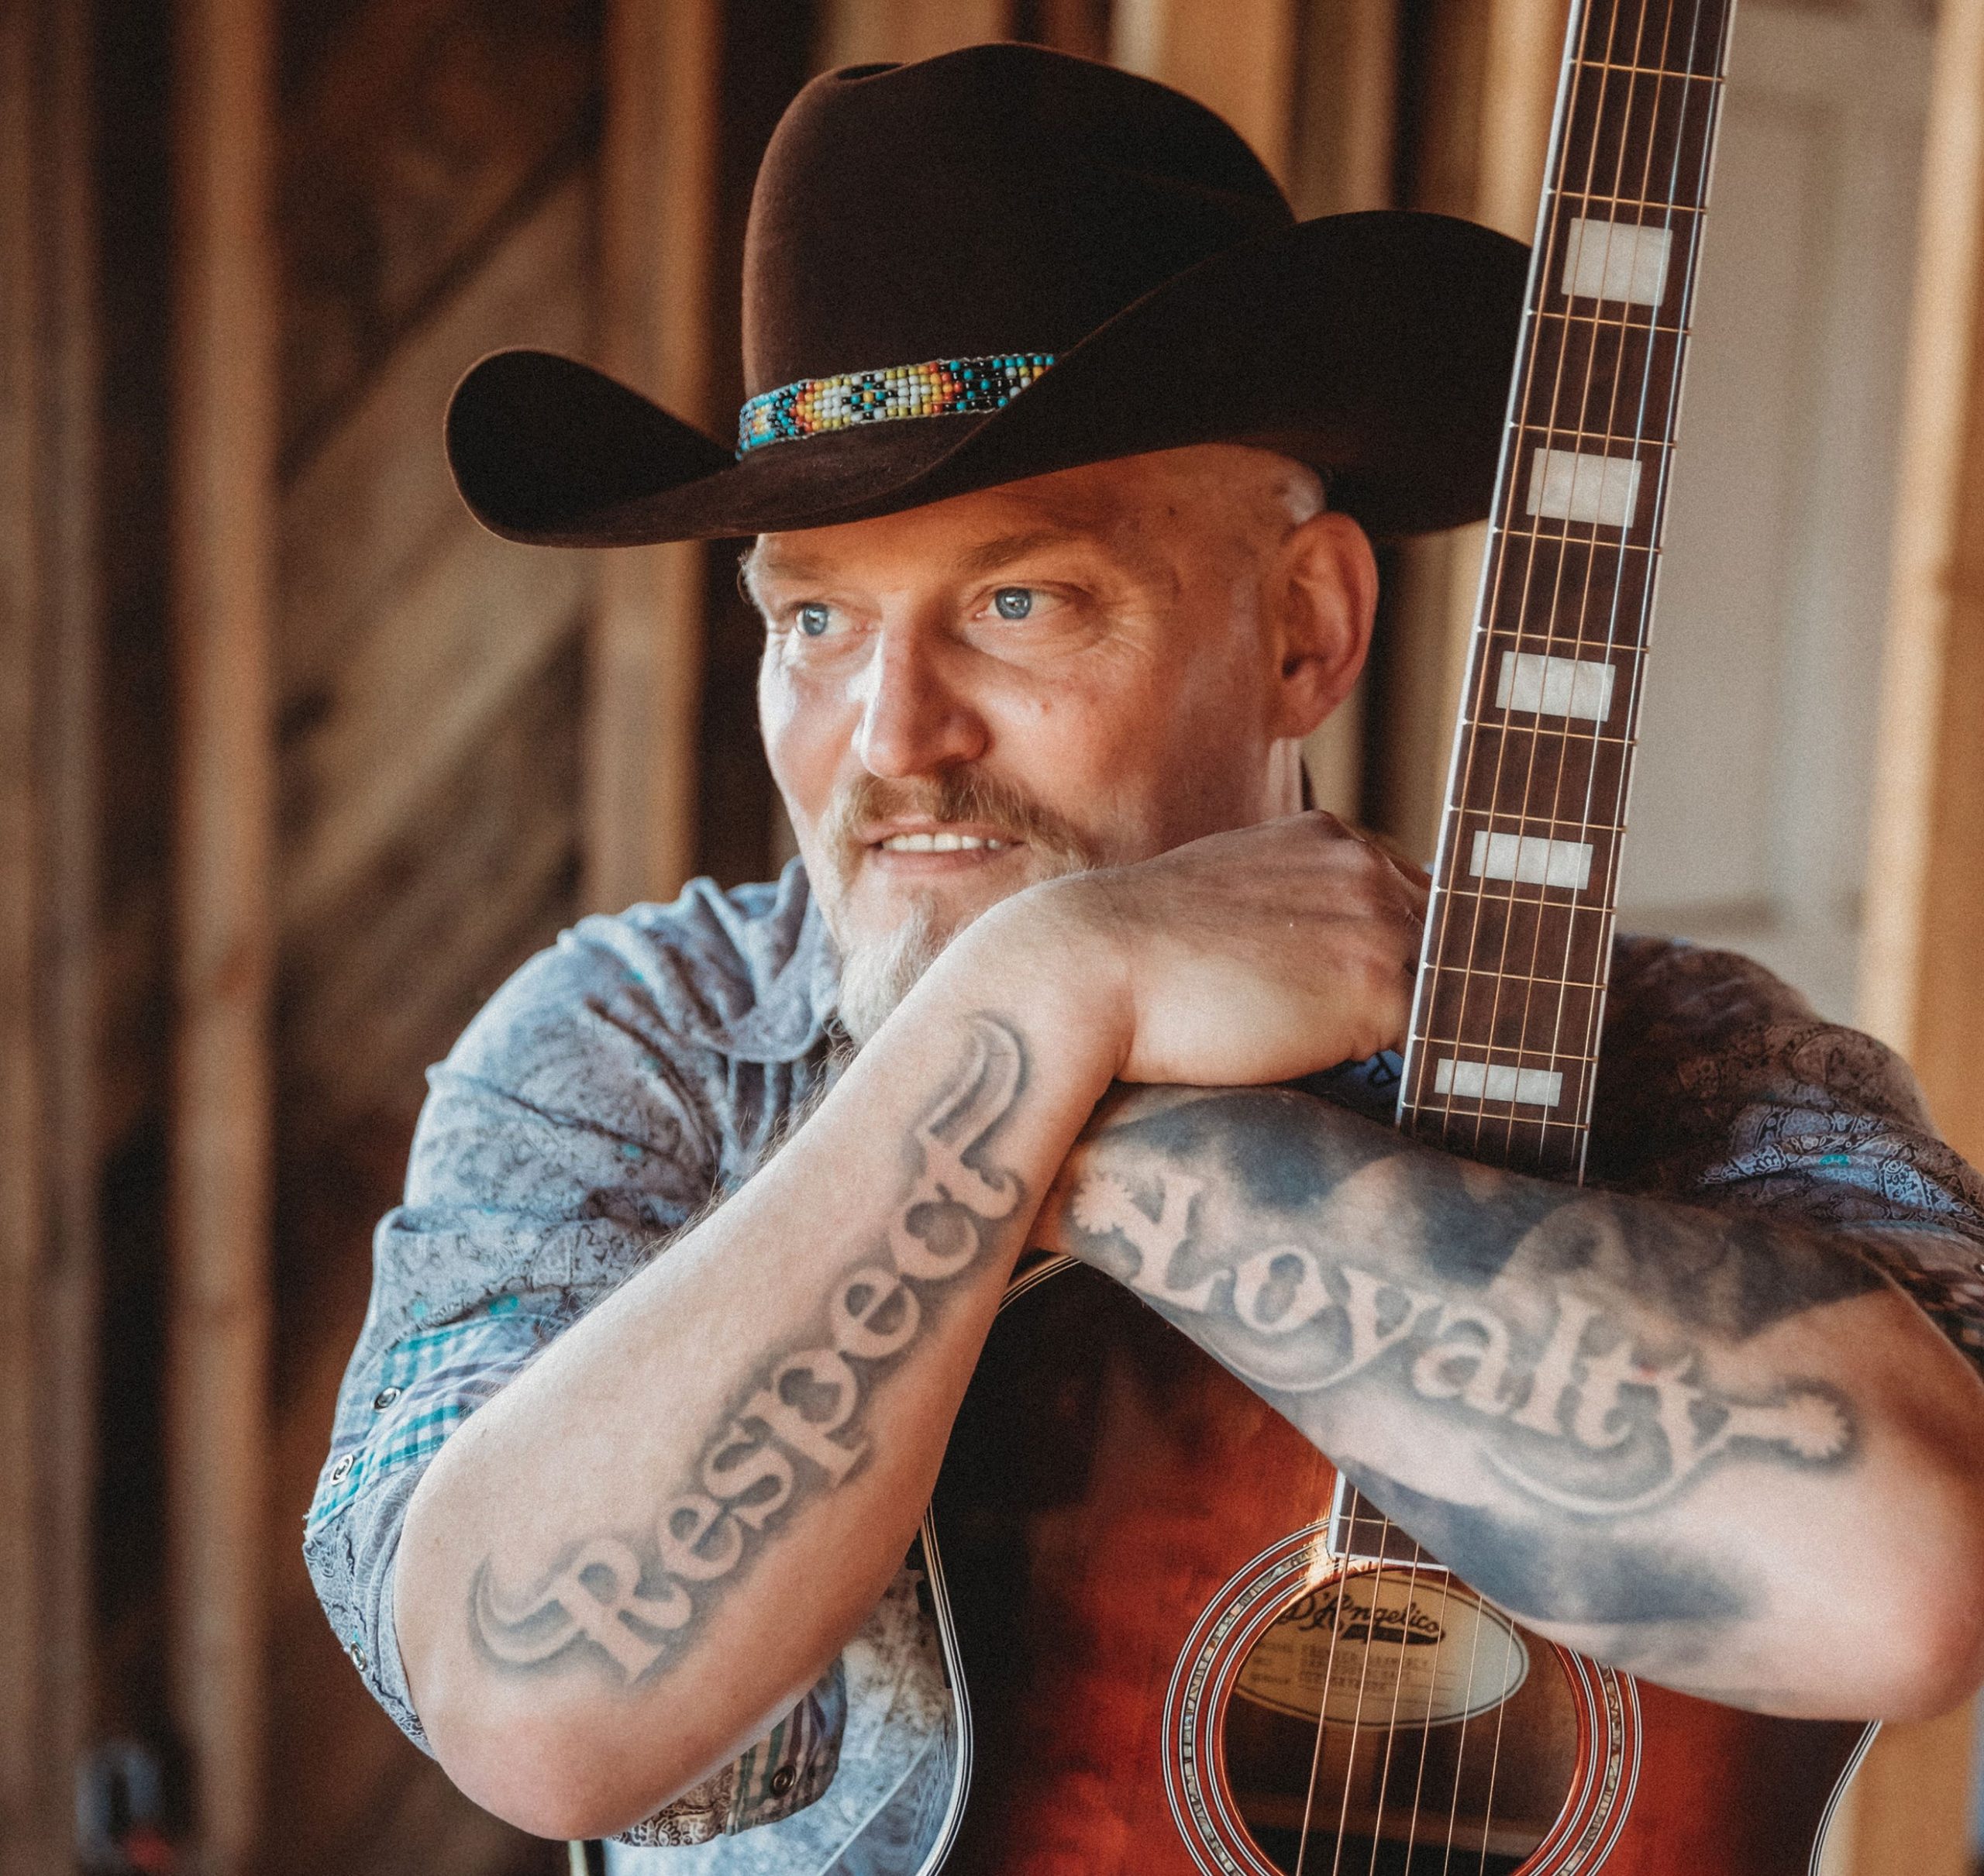 Regularly charting on National Radio Hits Charts, Country singer/songwriter ‘Rob Georg’ unveils touching new single ‘Cold War’.